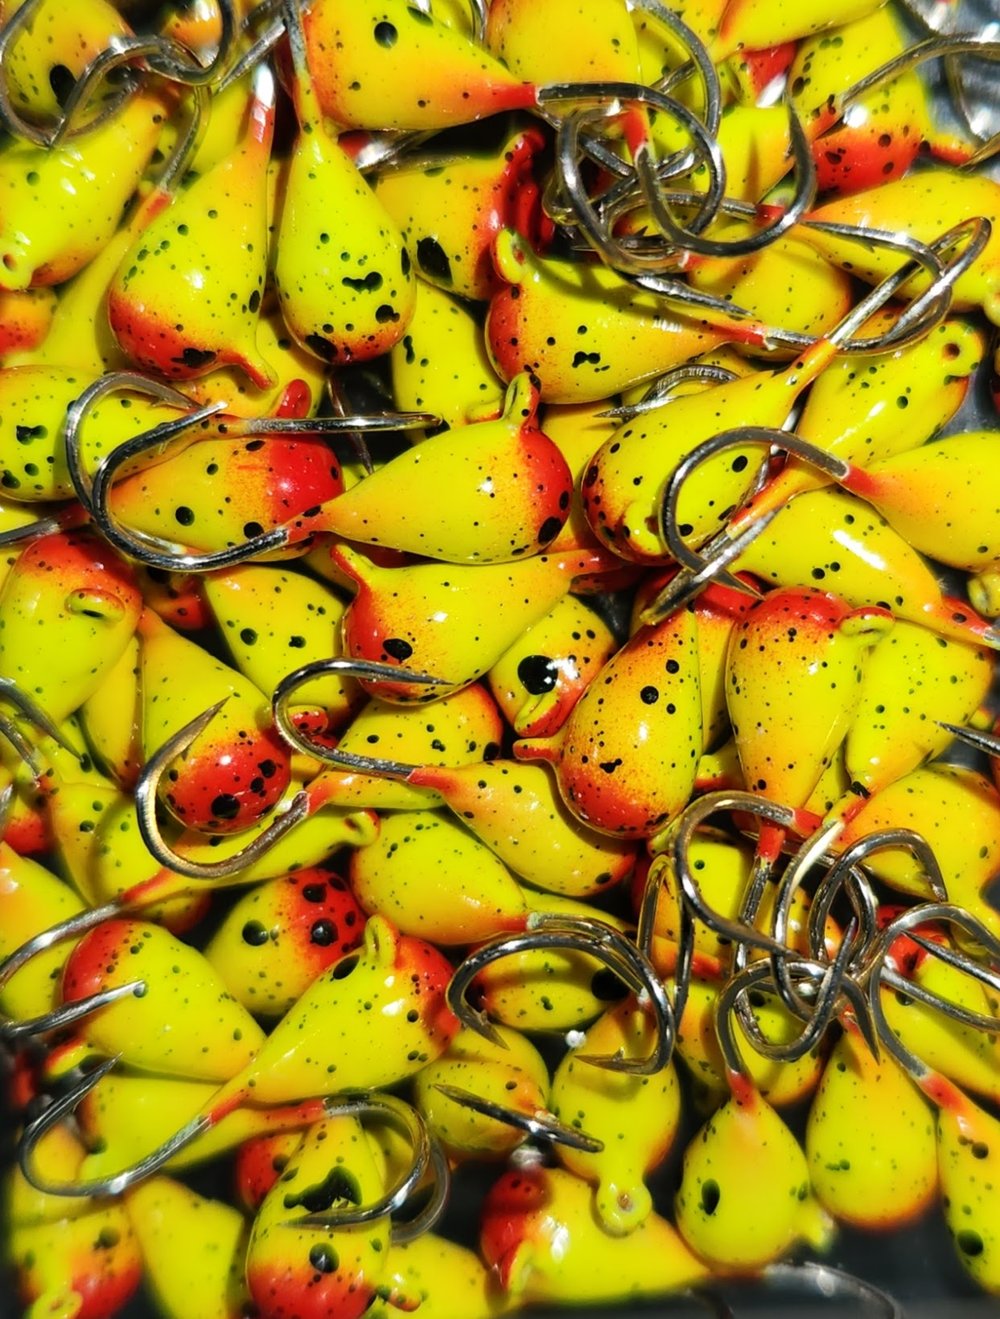 4mm Beautifully Painted Tungsten Teardrop Jigs: Choose Your Own